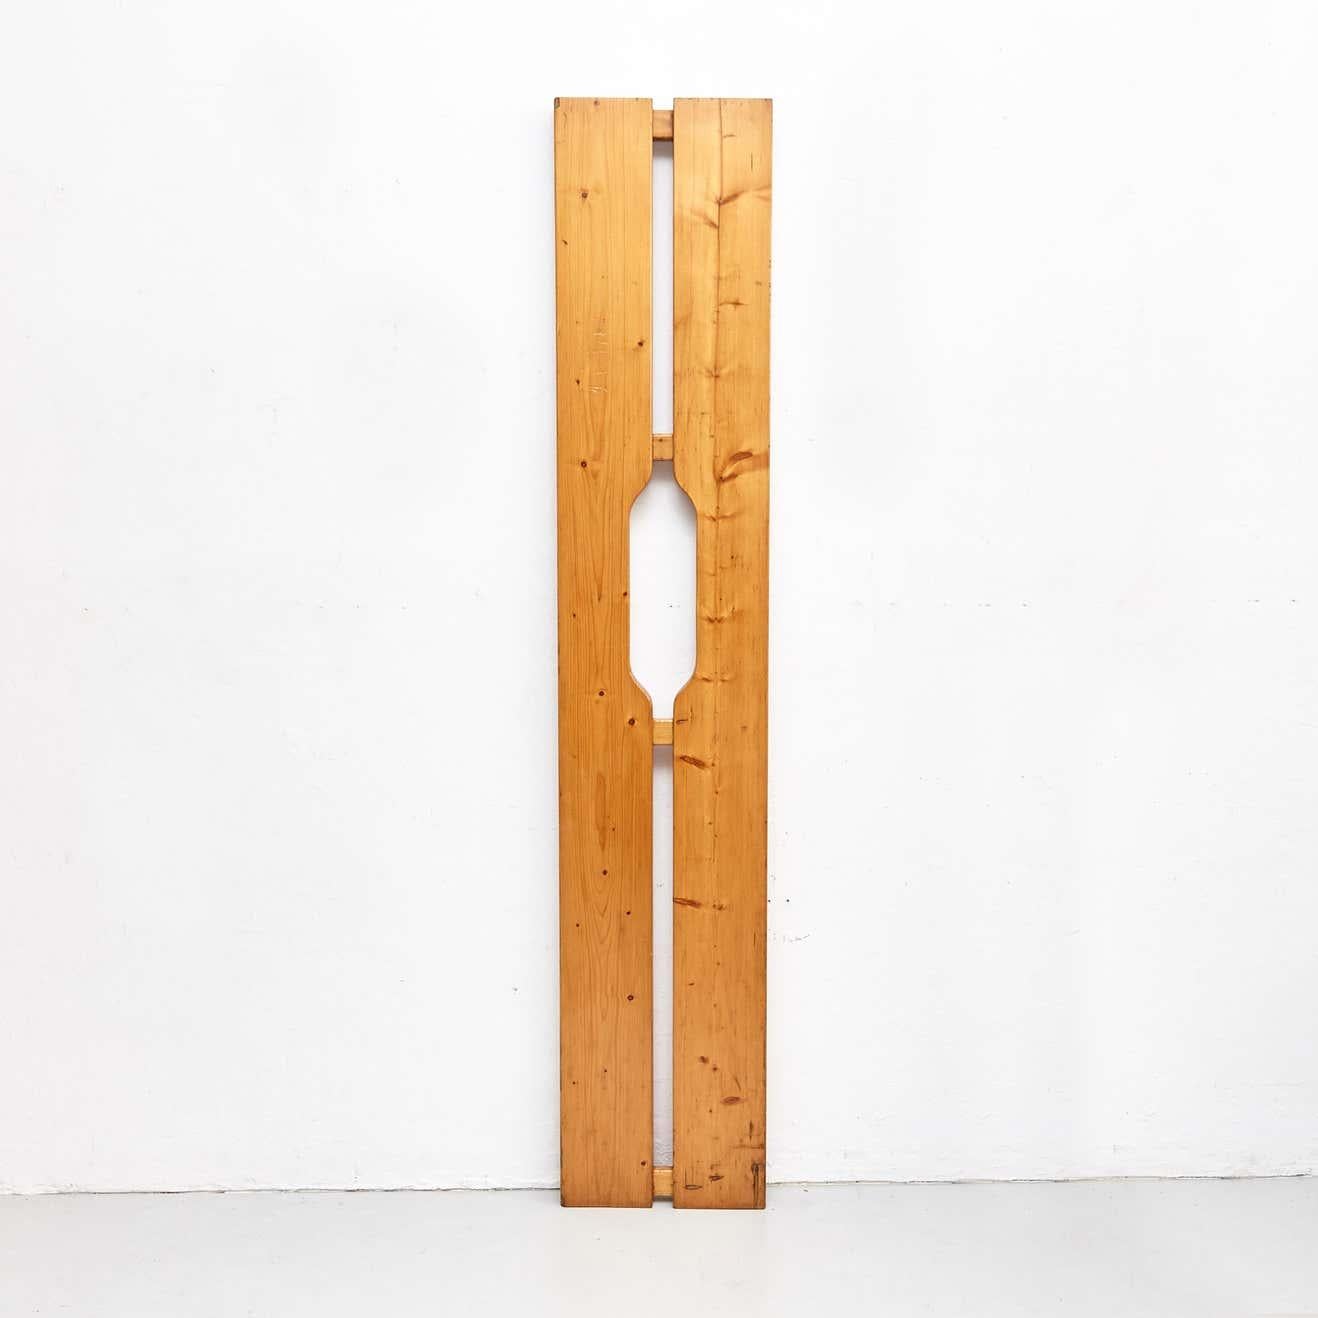 Arquitectural piece designed by Charlotte Perriand for Les Arcs France in 1960

In good original condition, preserving a beautiful patina, with minor wear consistent with age and use. 

Charlotte Perriand (1903-1999) She was born in Paris in